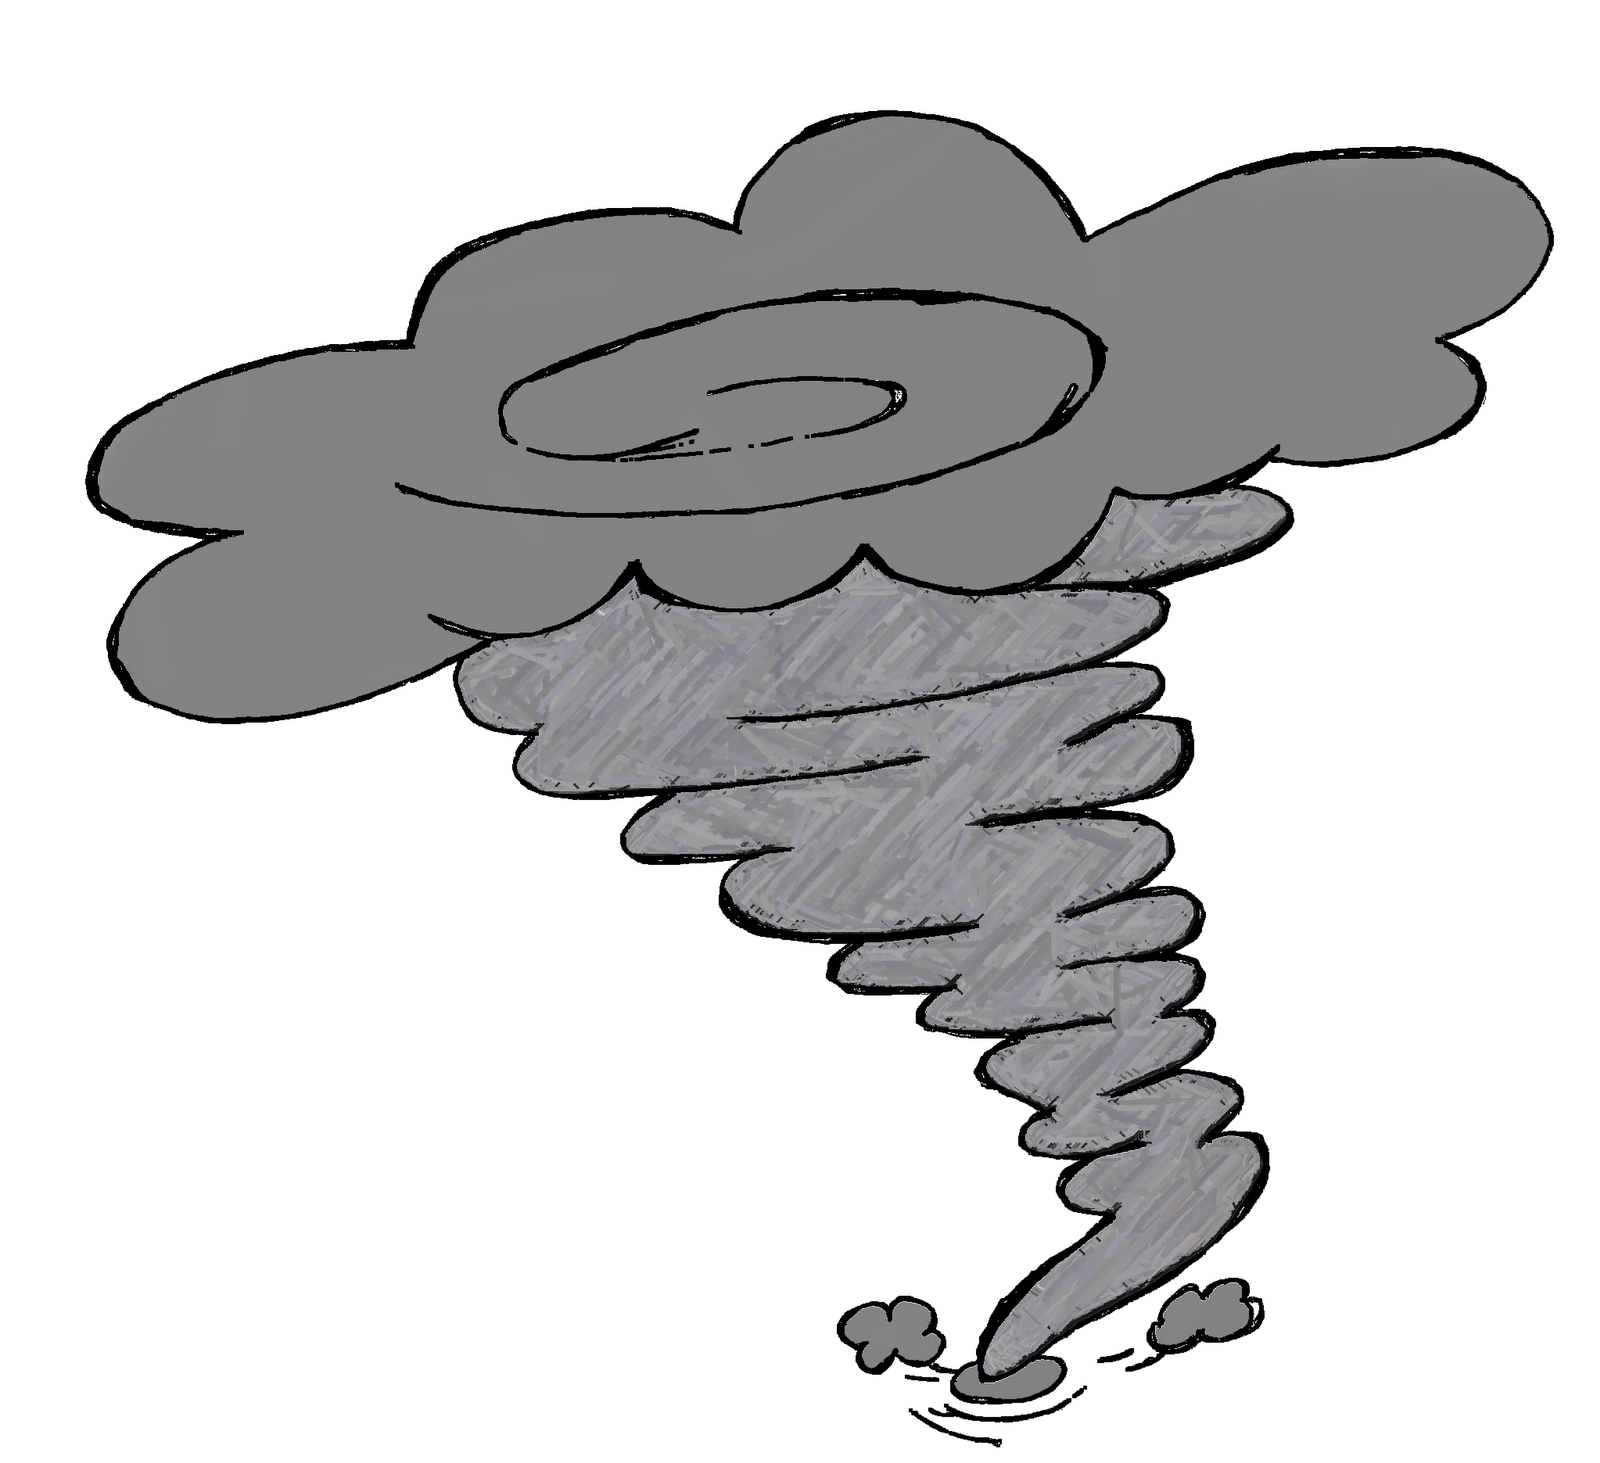     By Carrie Teaching First  Weather Doodles Clip Art And Freebie Tornado